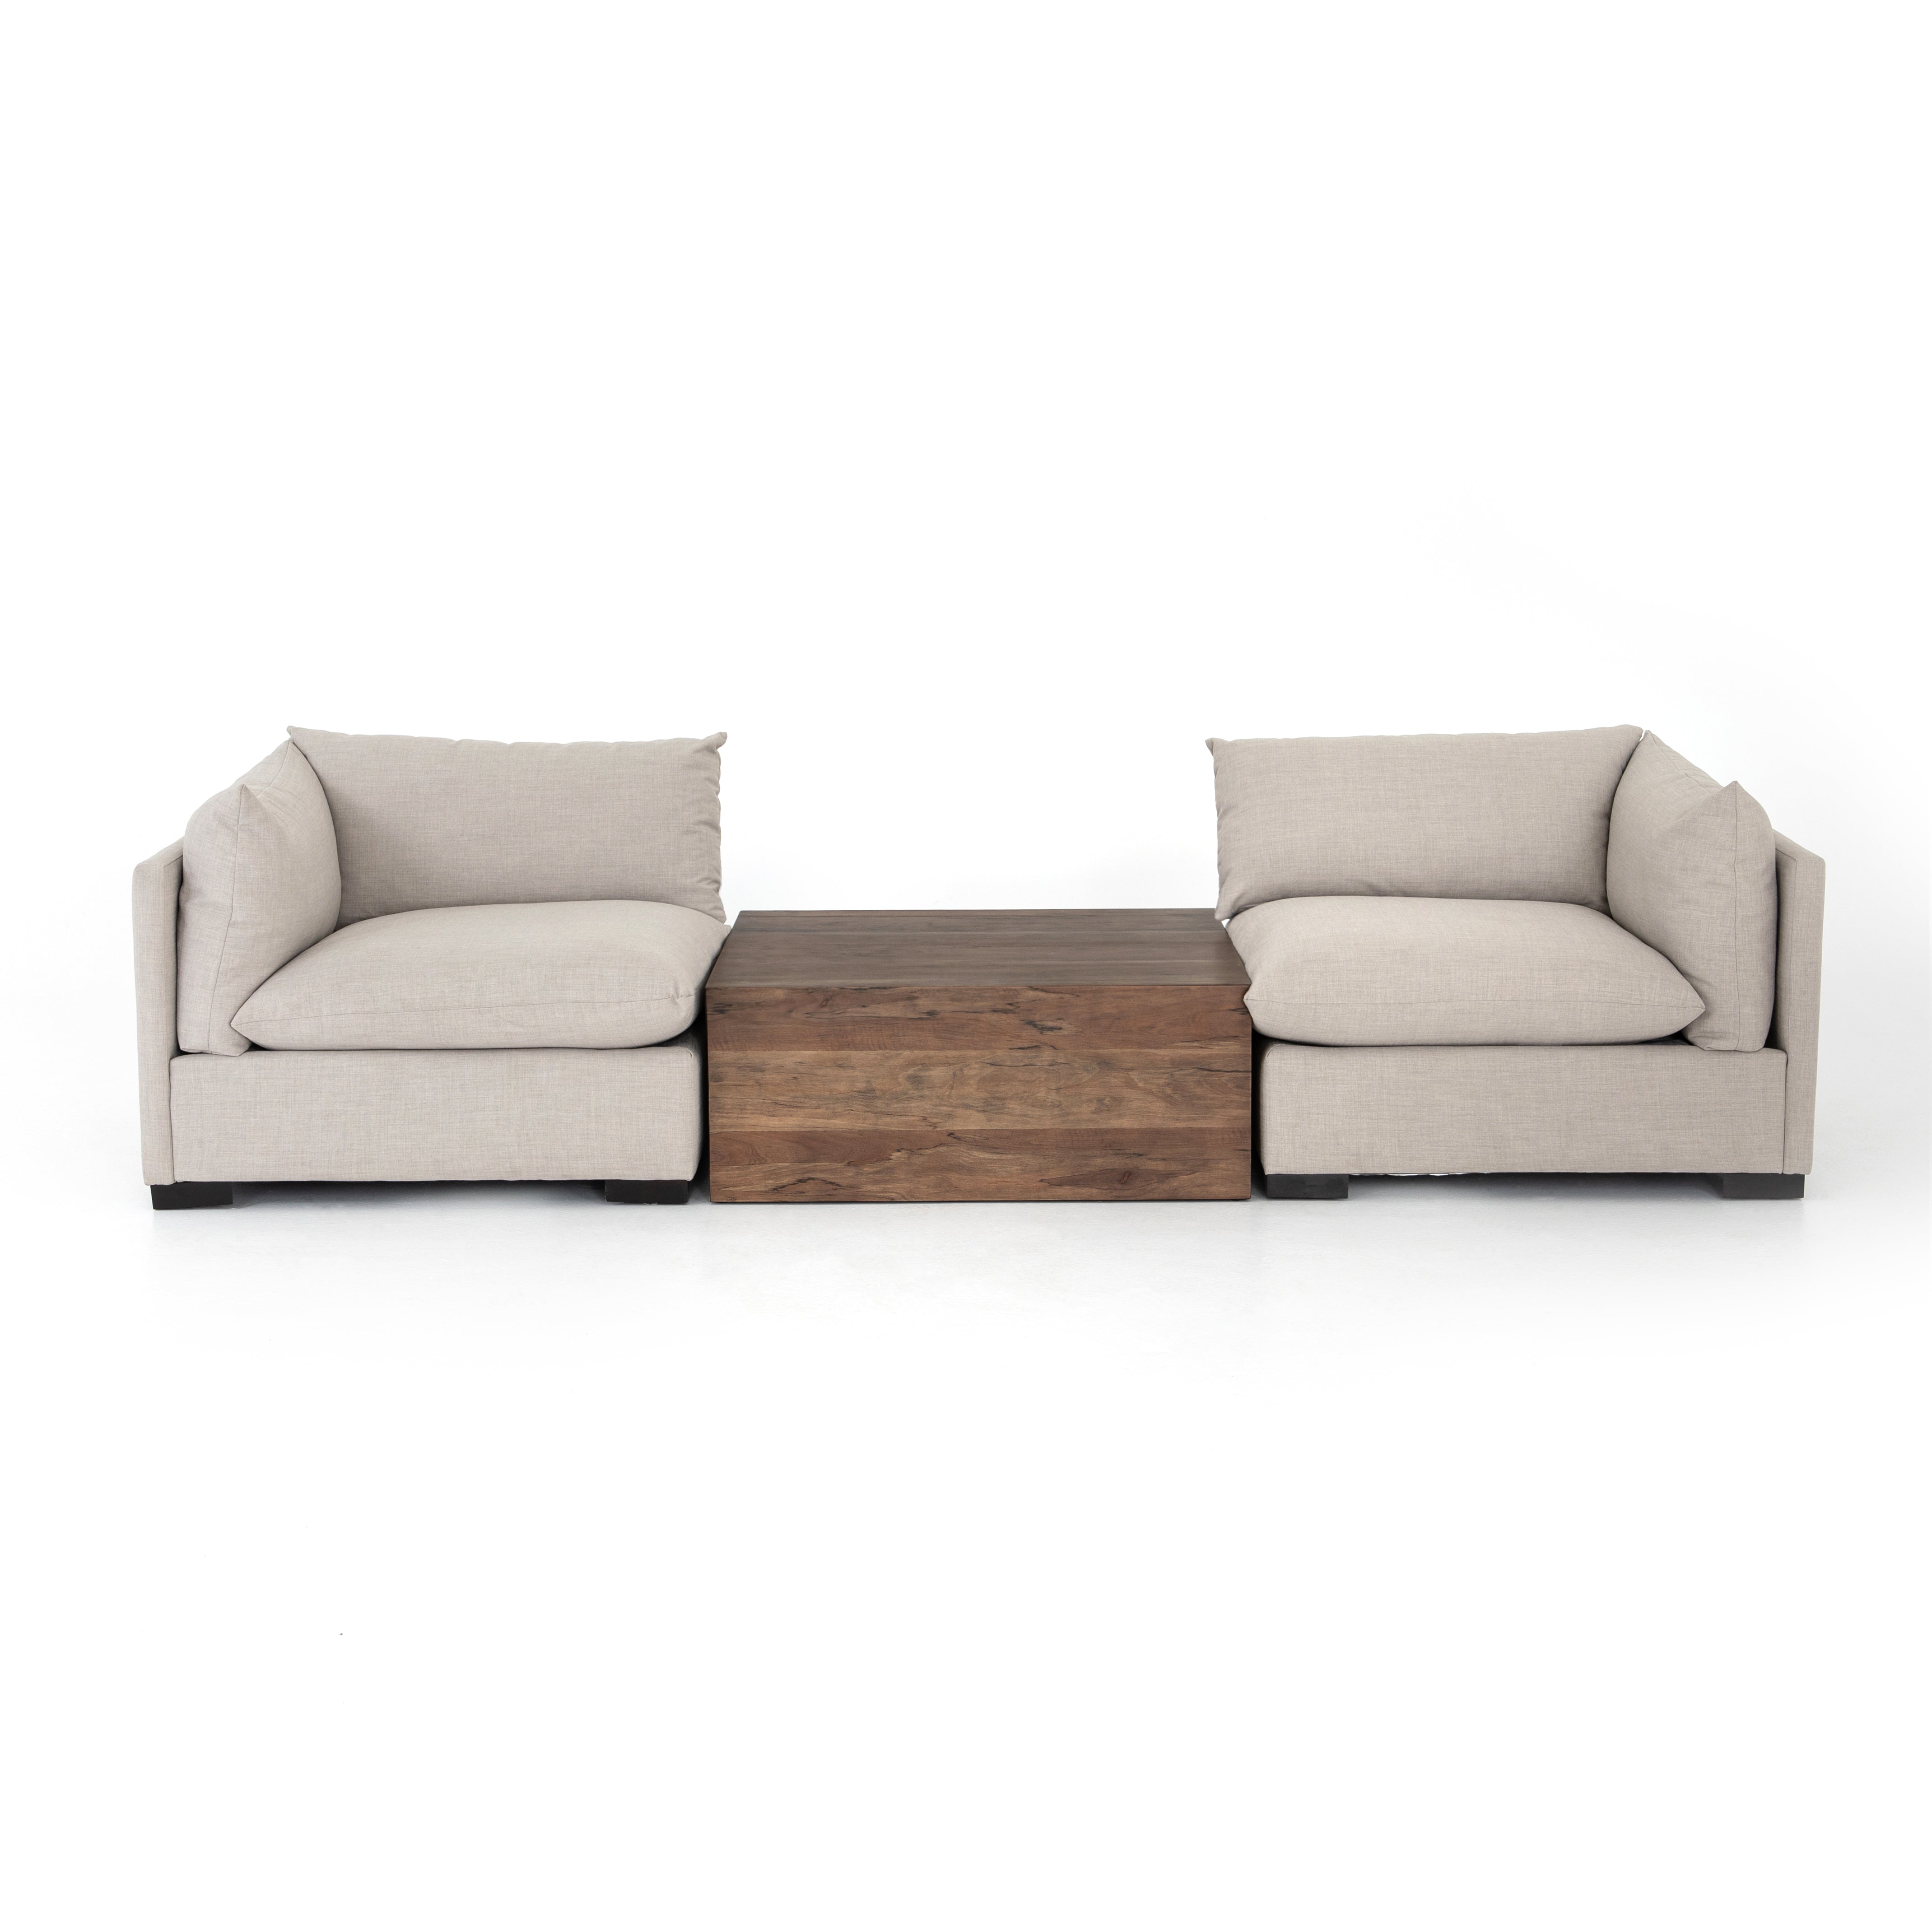 We love the durability in this Westwood Bennett Moon Right Arm Facing Sectional Piece. This is the ultimate low-and-deep lounger, perfect for reading your favorite book in.   Materials: Banak Wood, 100% Polyester